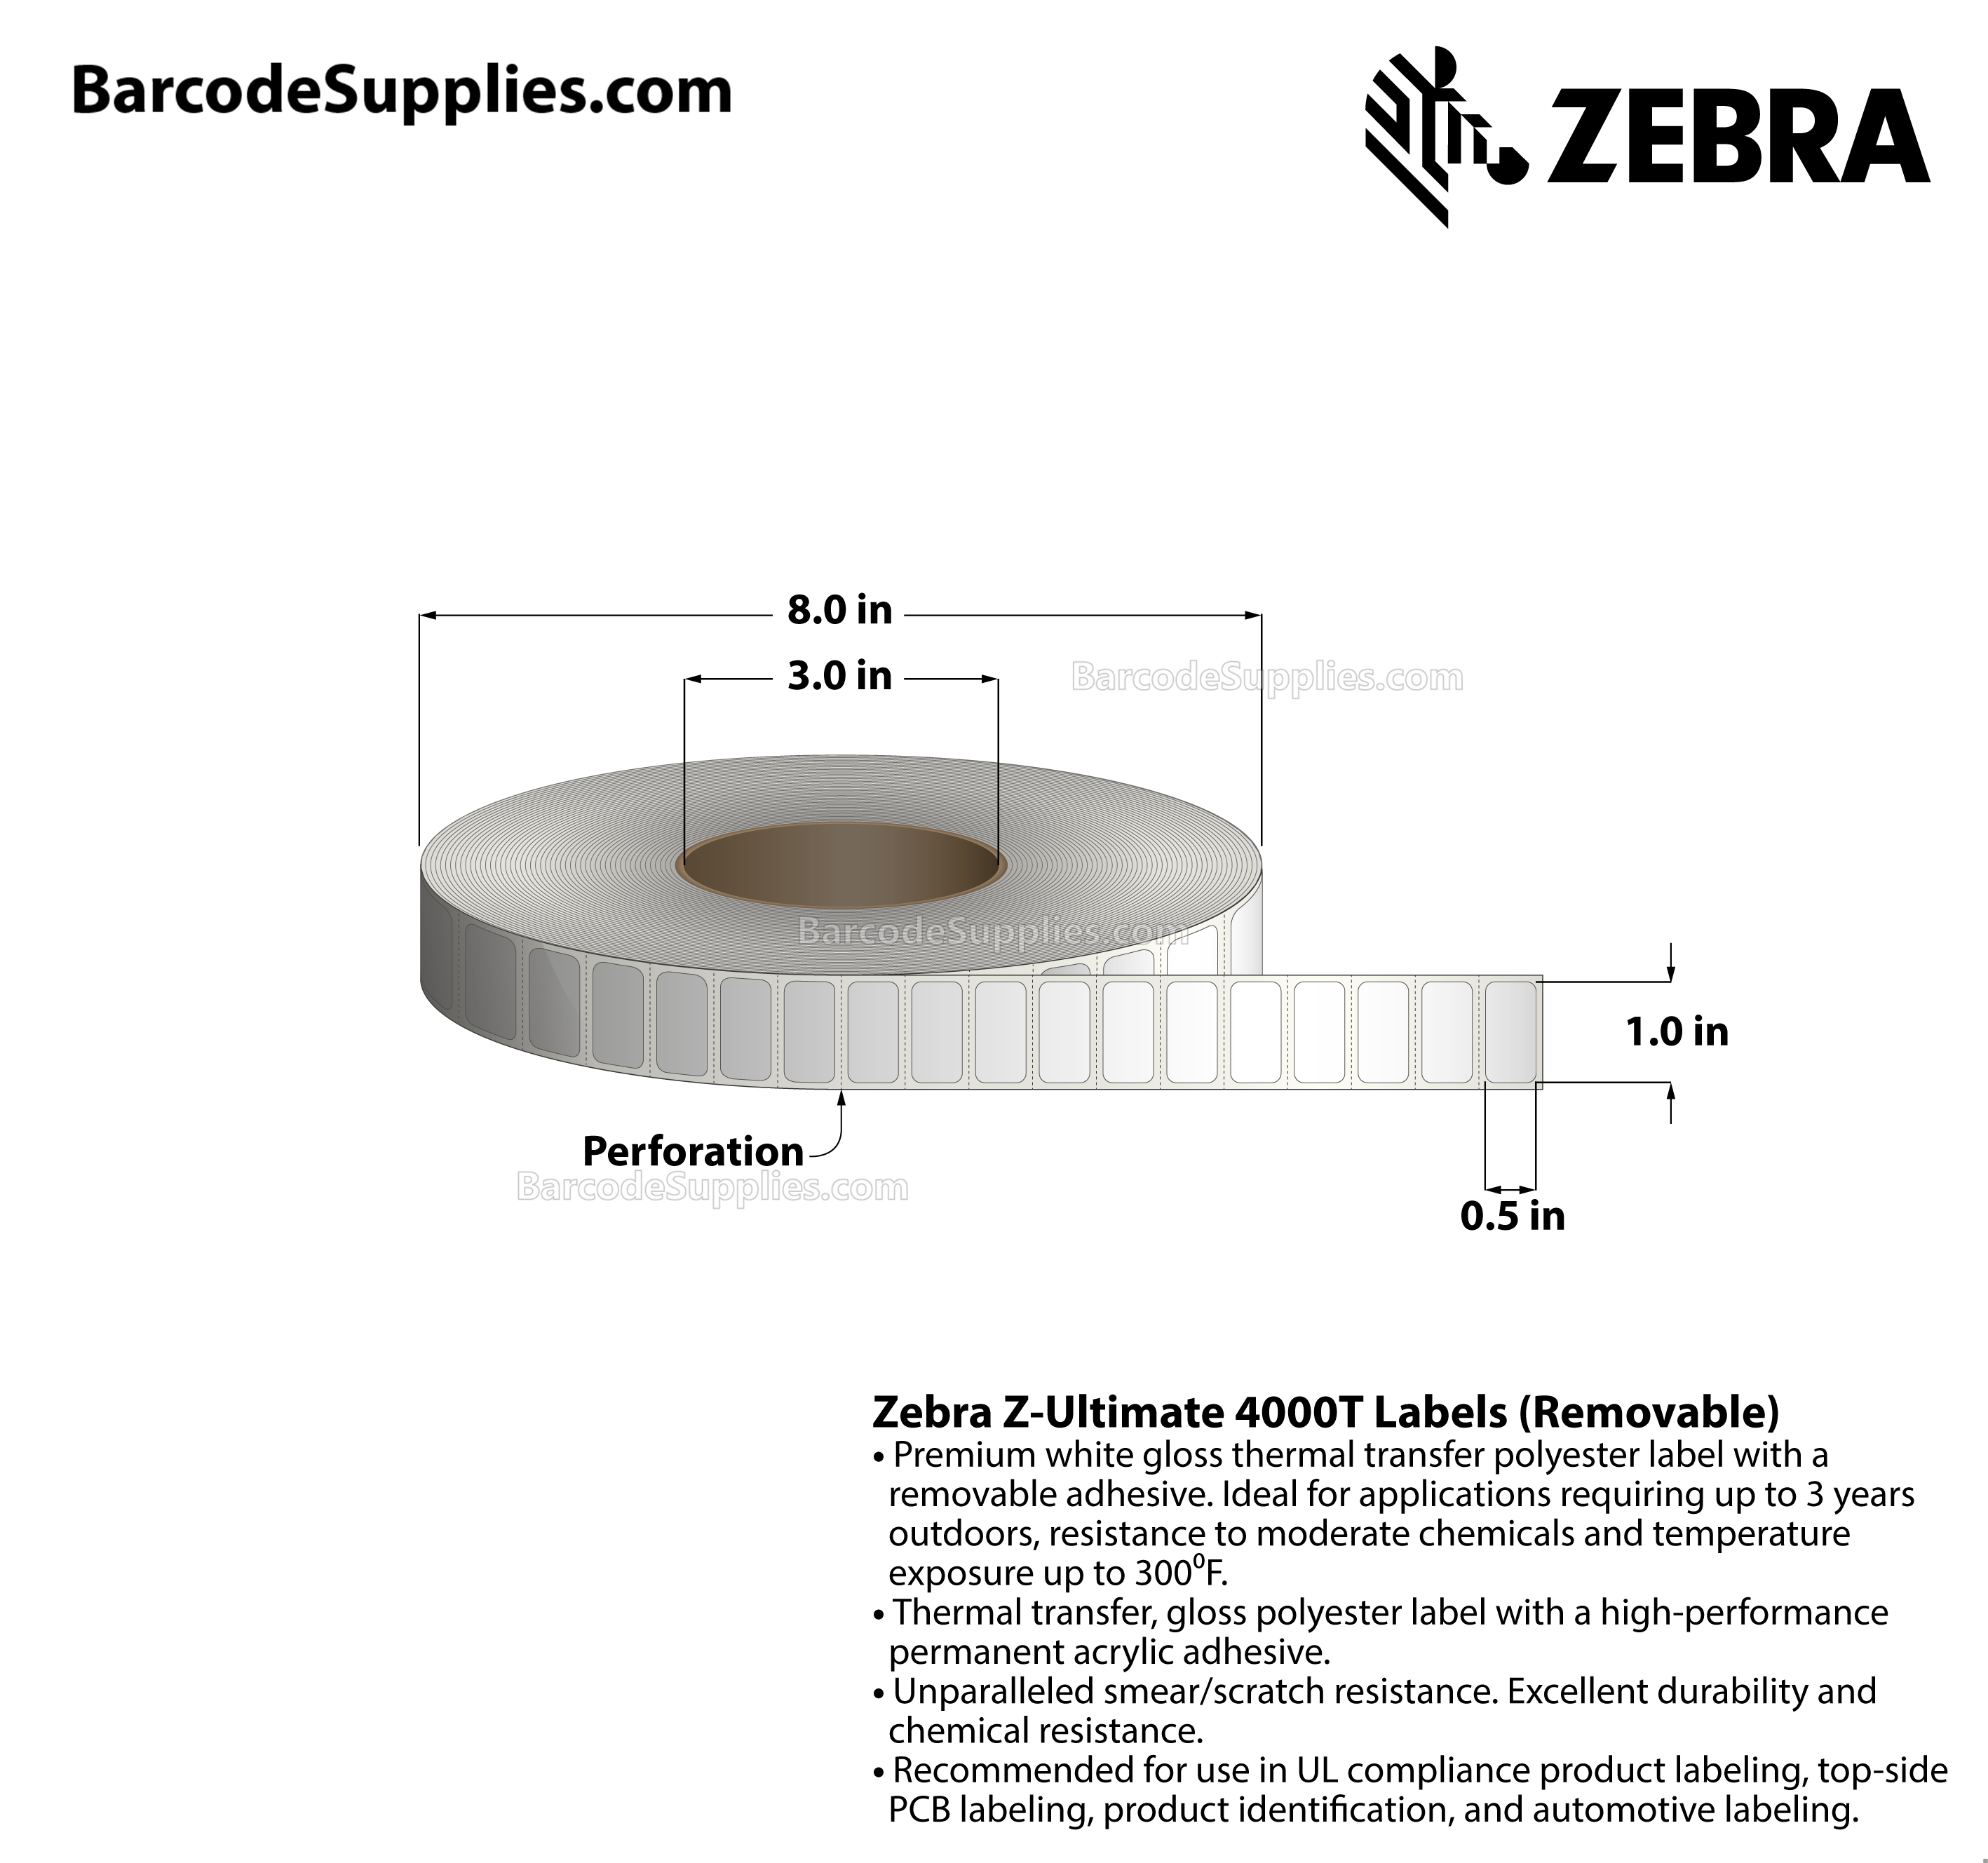 1 x 0.5 Thermal Transfer White Z-Ultimate 4000T Removable Labels With Removable Adhesive - Perforated - 10000 Labels Per Roll - Carton Of 1 Rolls - 10000 Labels Total - MPN: 10023362